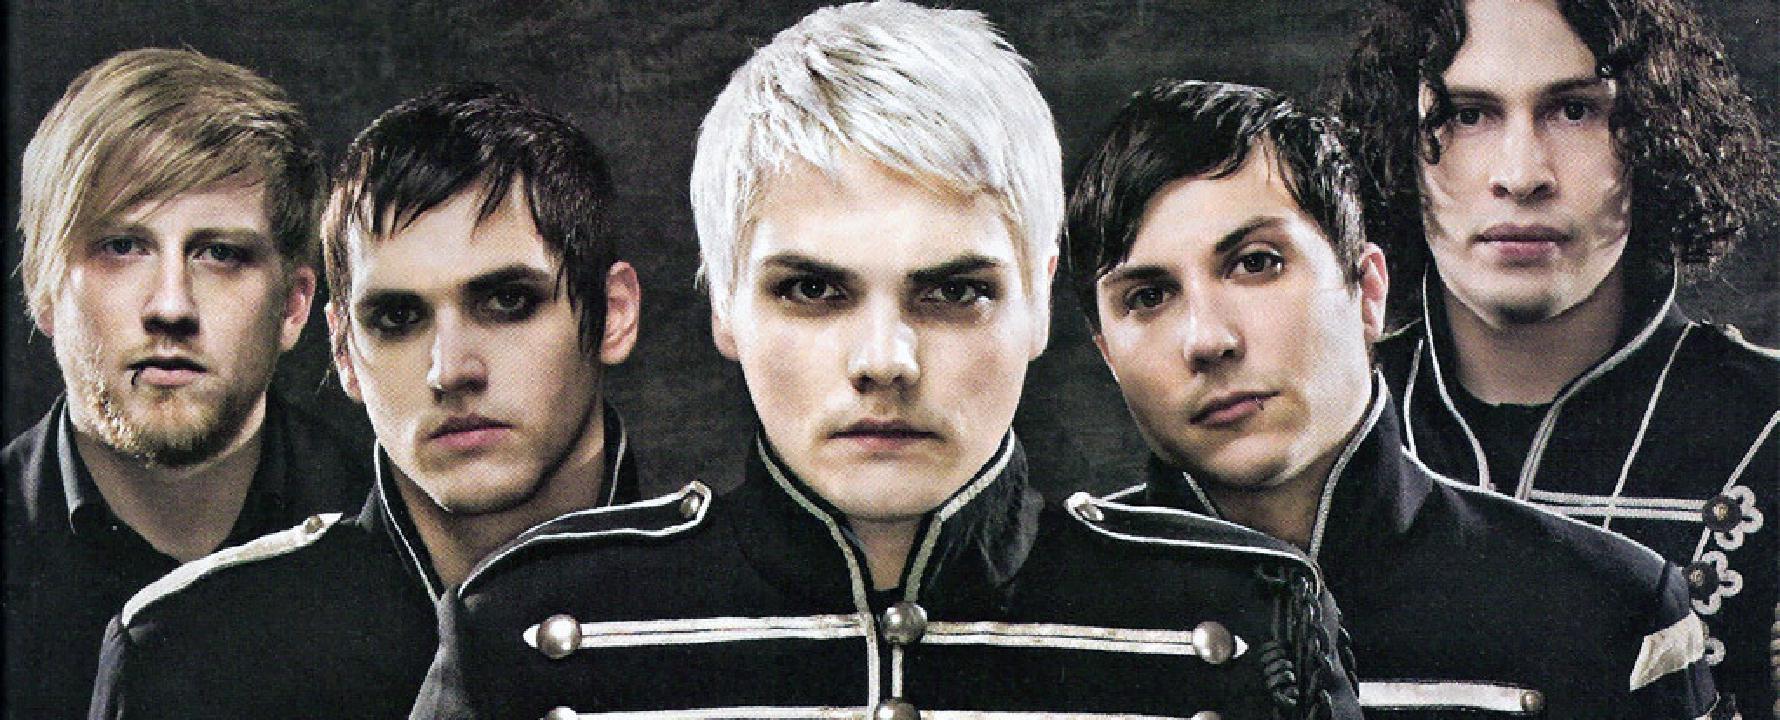 Promotional photograph of My Chemical Romance.